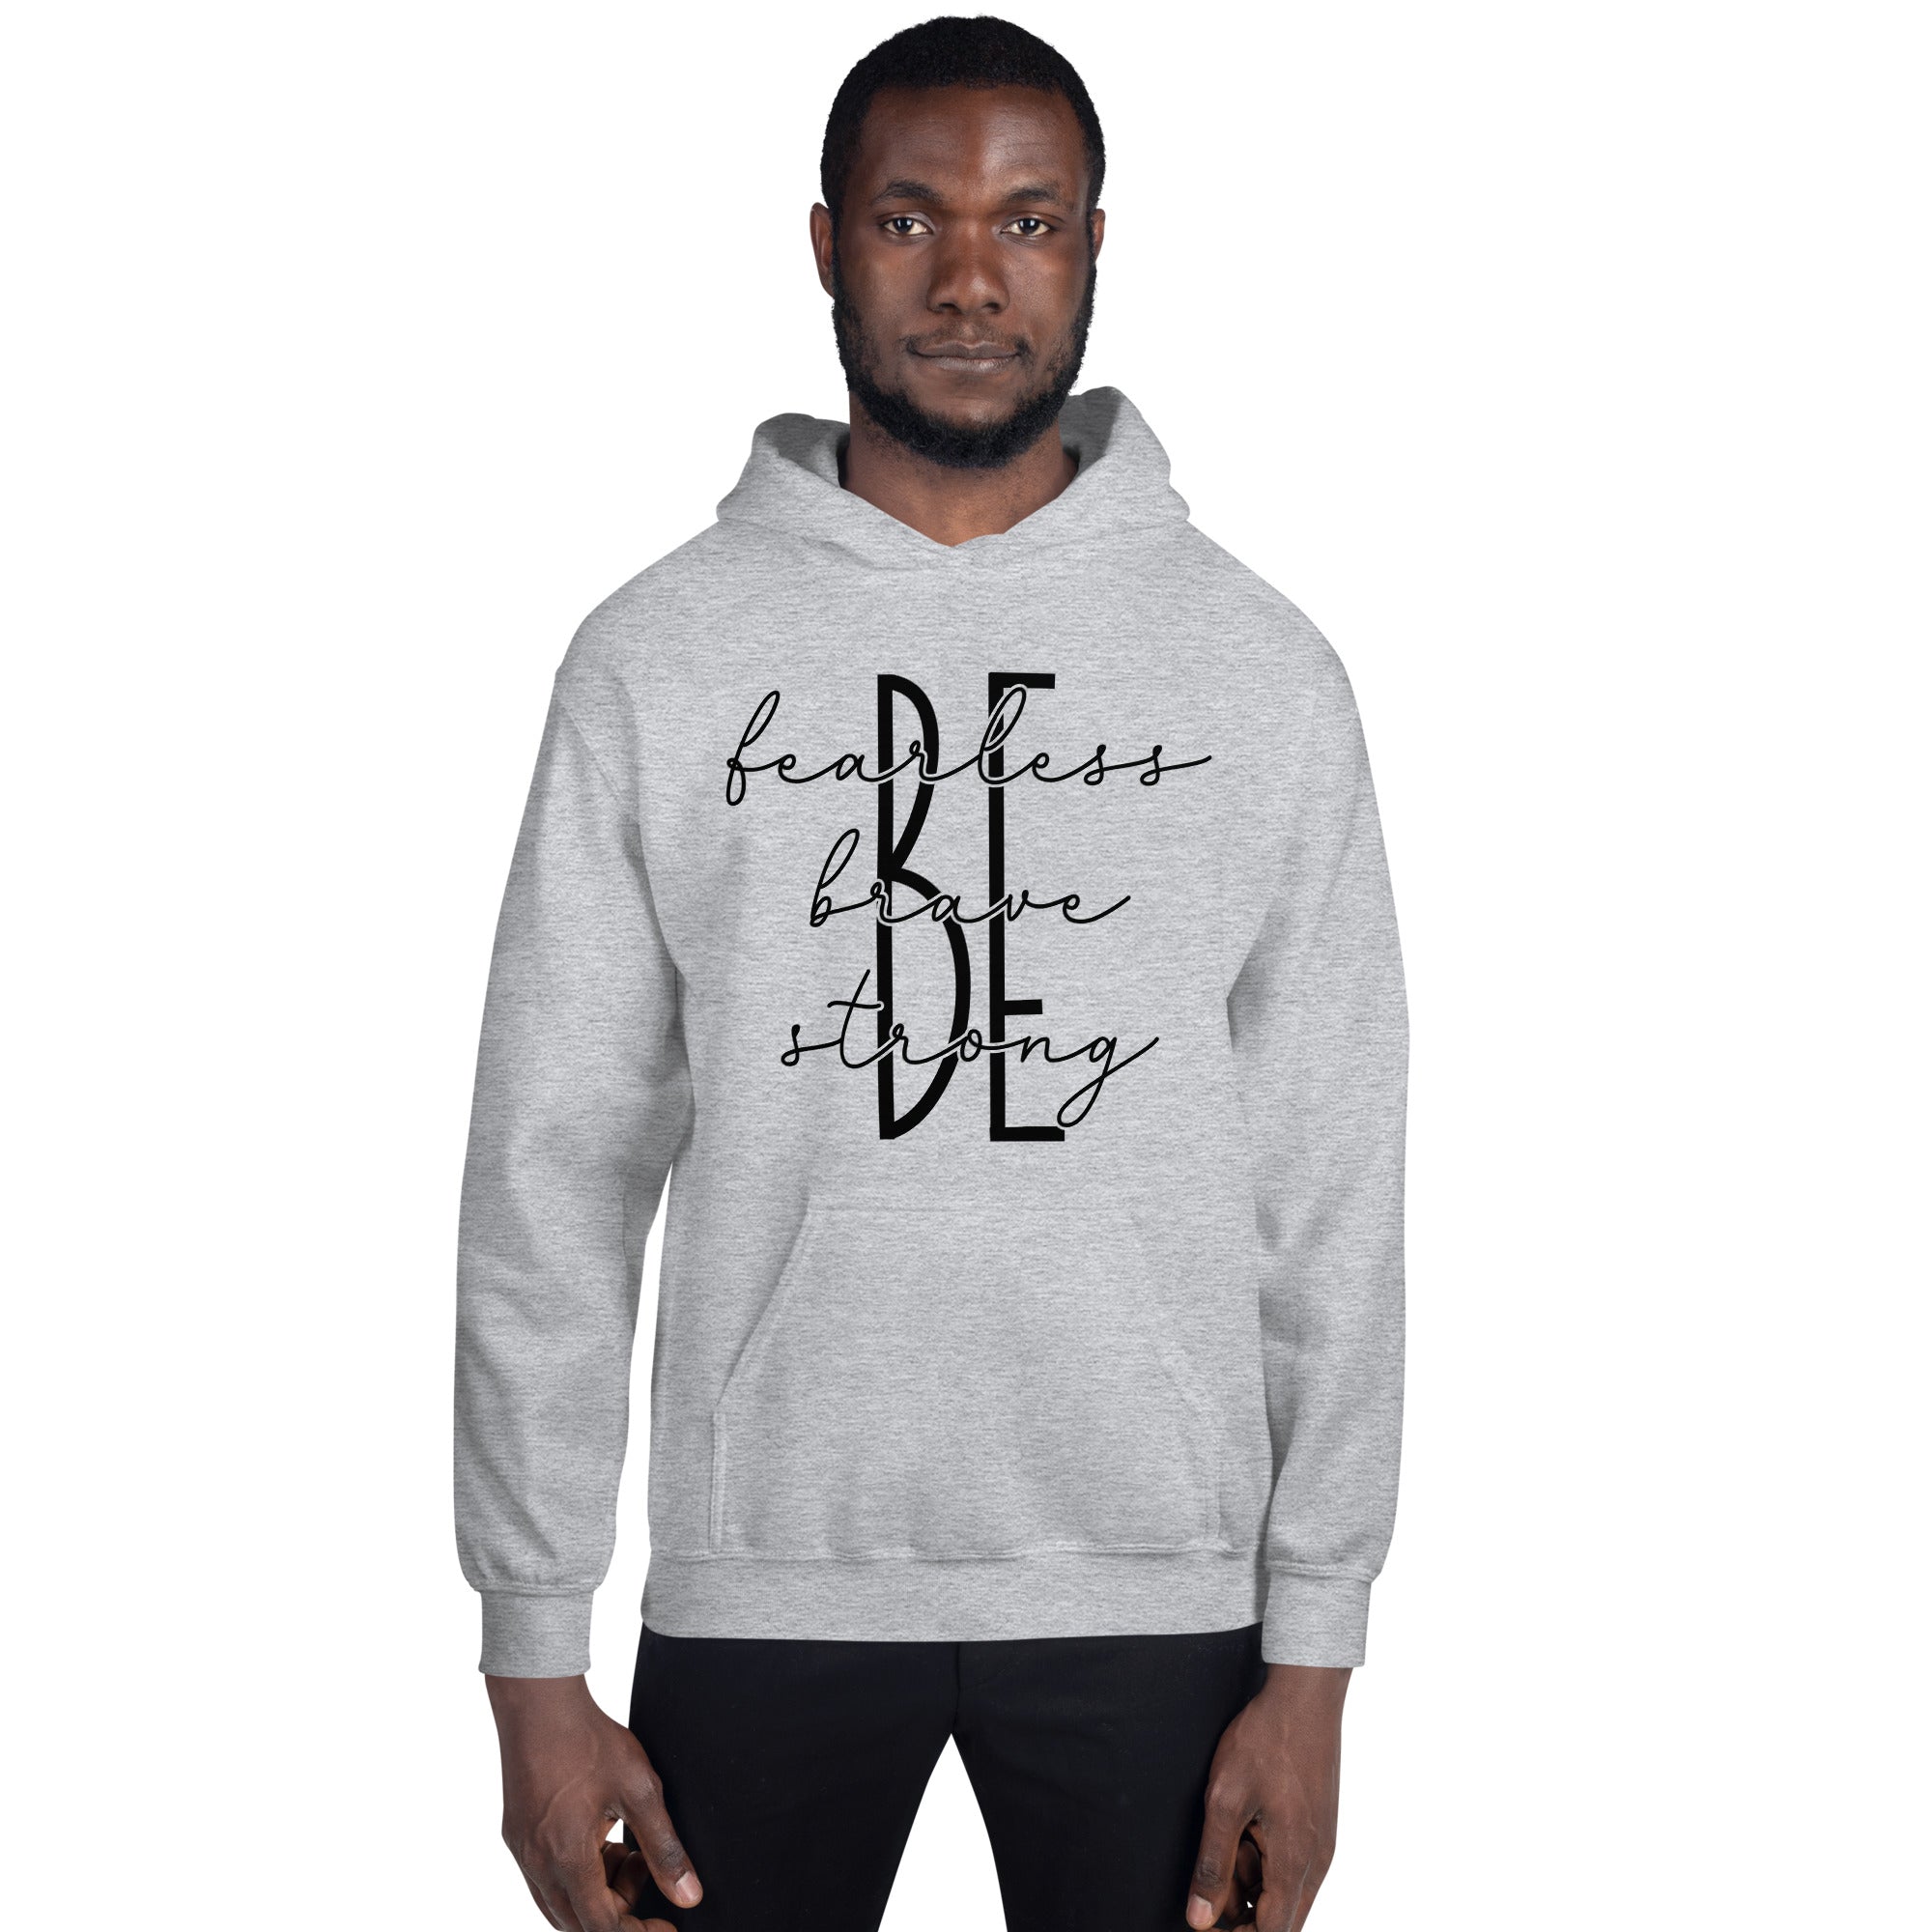 Be Fearless, Brave, Strong - Unisex Hoodie